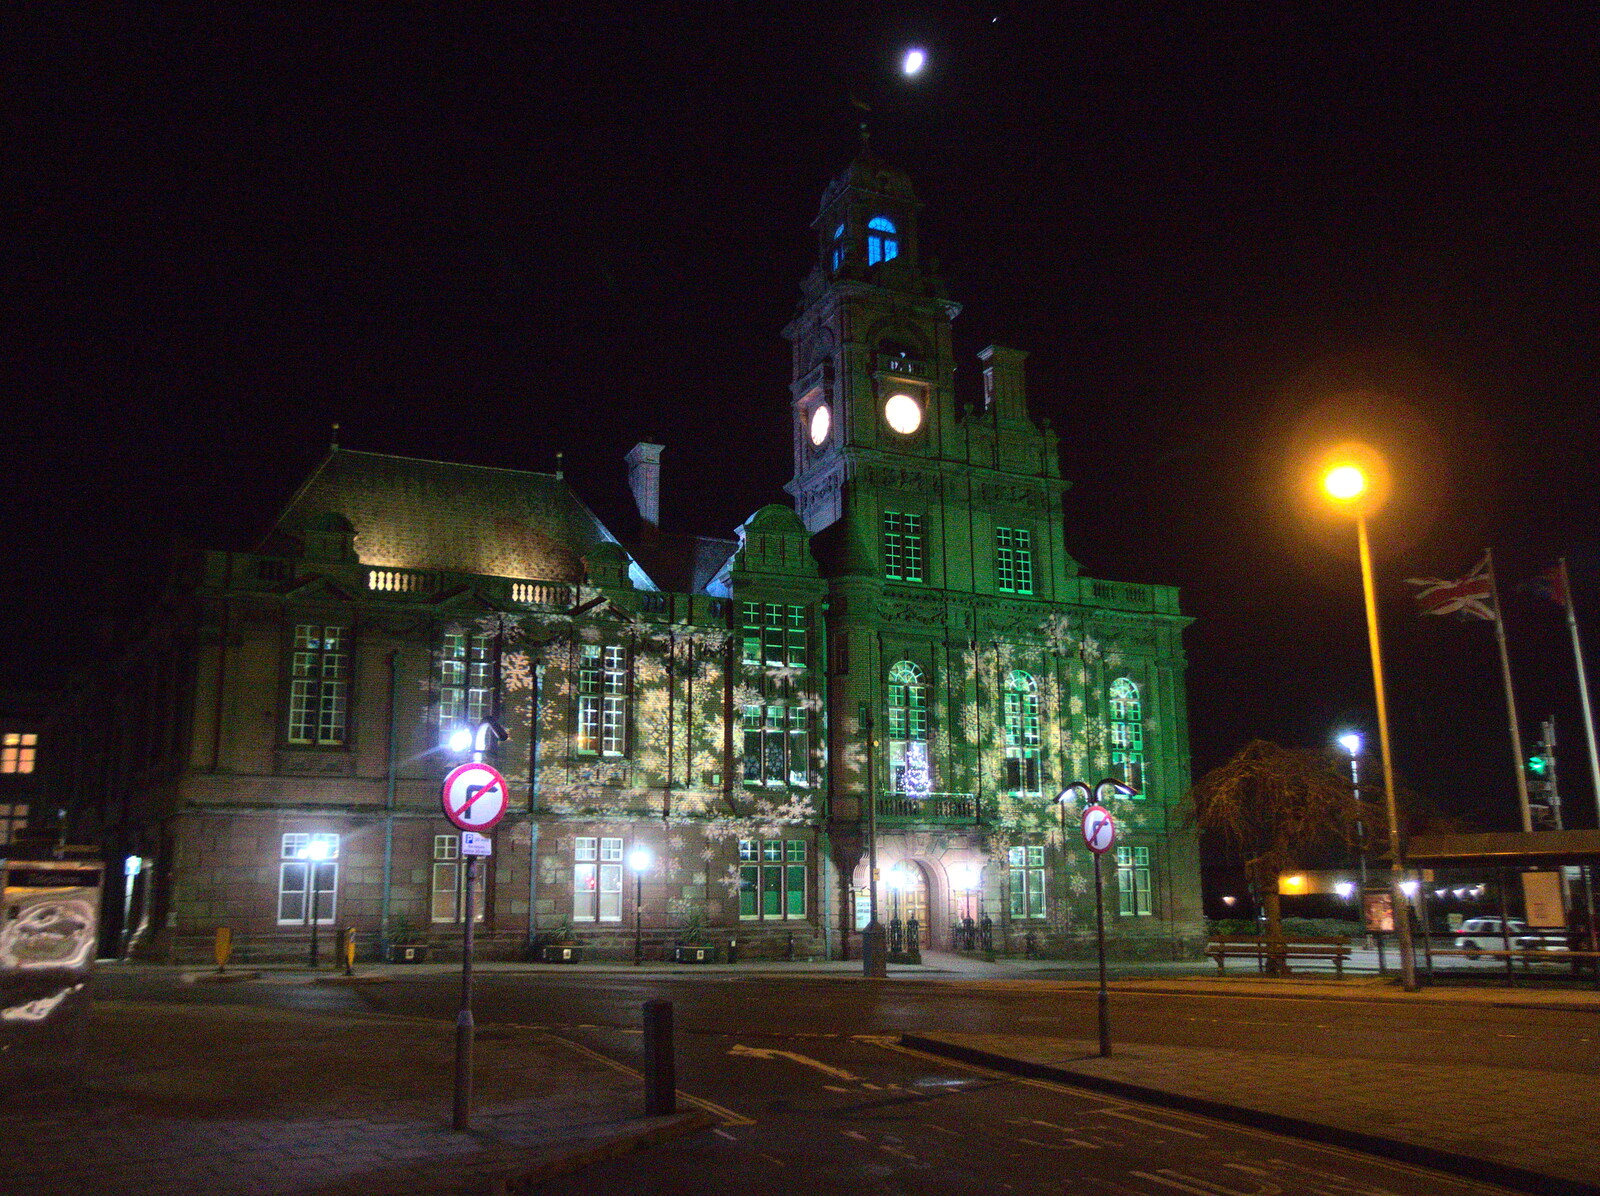 The town council offices are nicely lit up from The Hippodrome Christmas Spectacular, Great Yarmouth, Norfolk - 29th December 2022